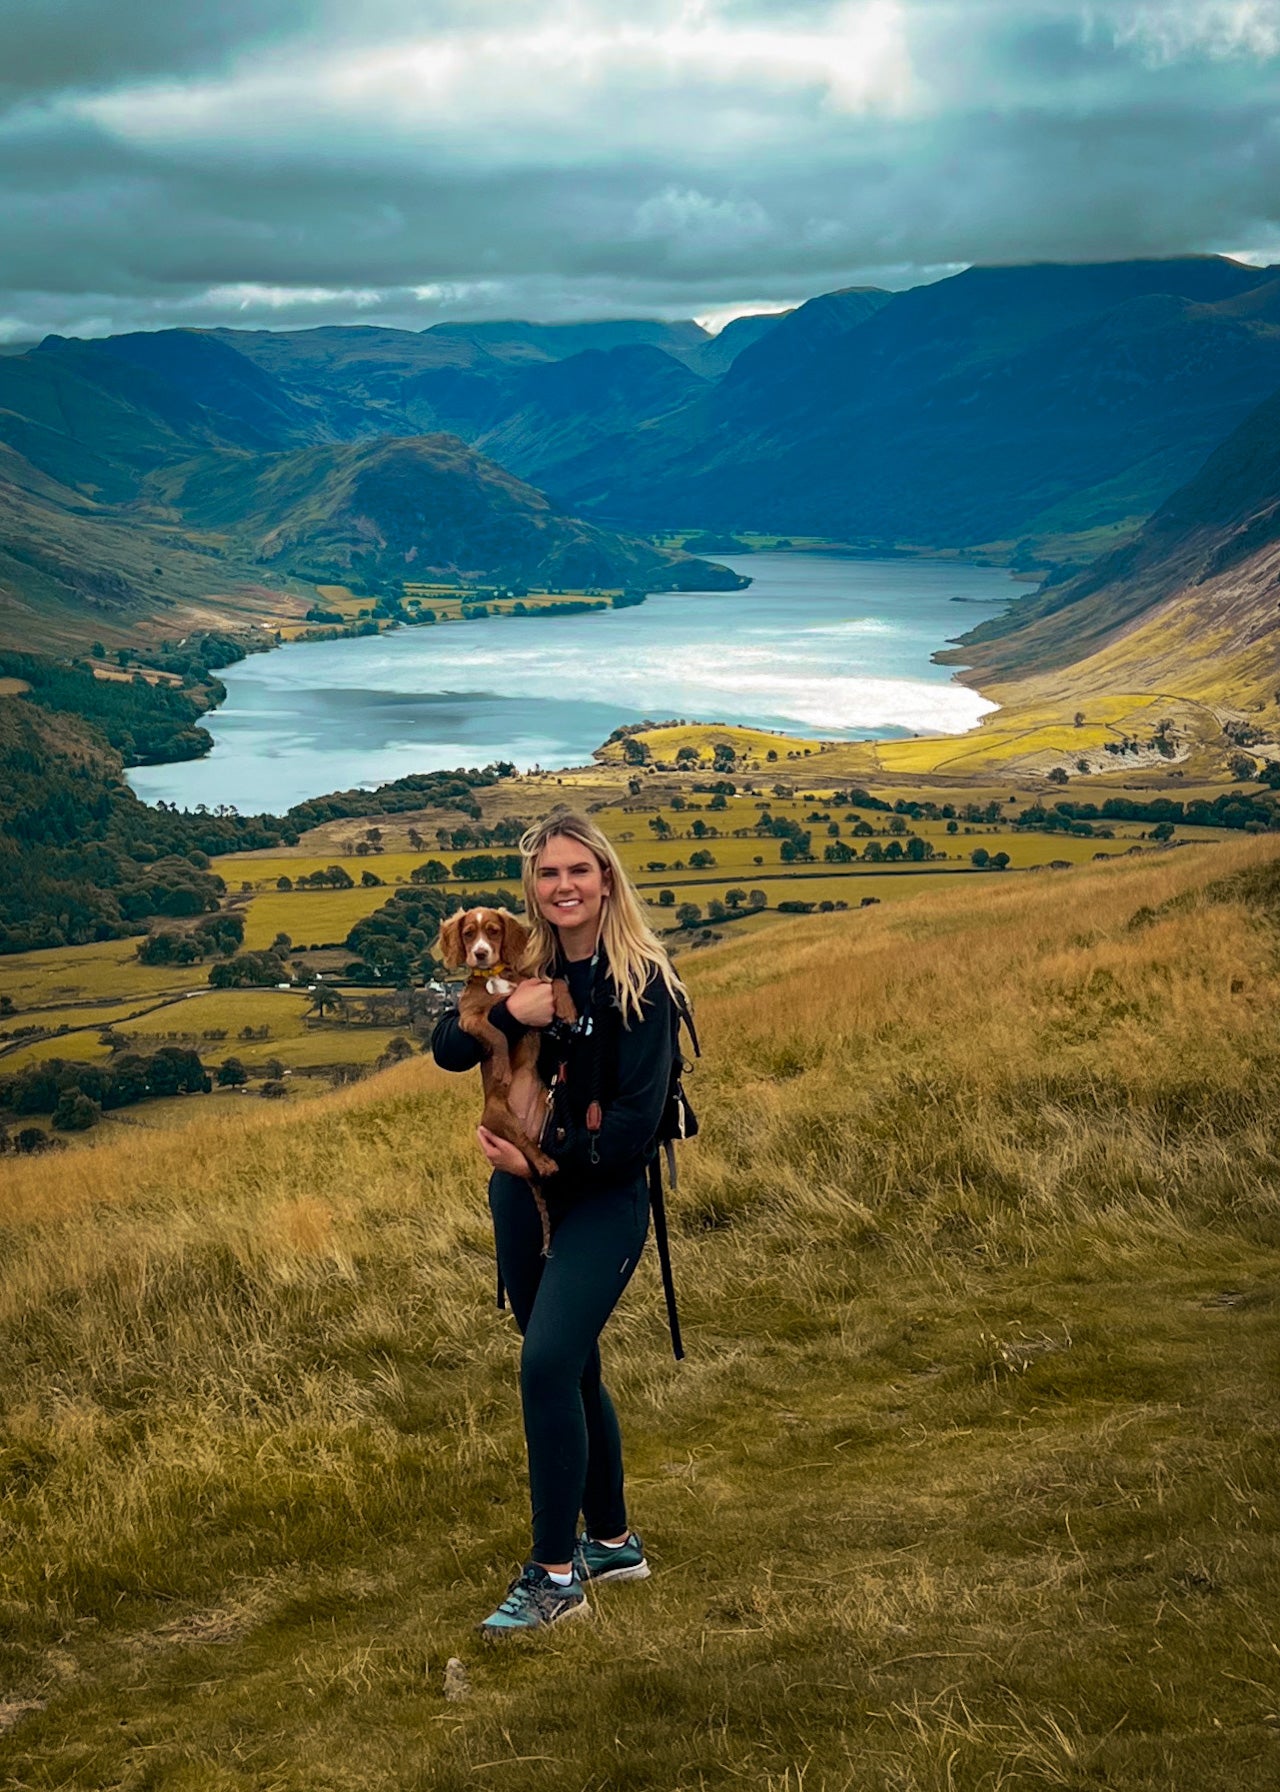 Woman holding a spaniel puppy on a grassy hillside above a lake.